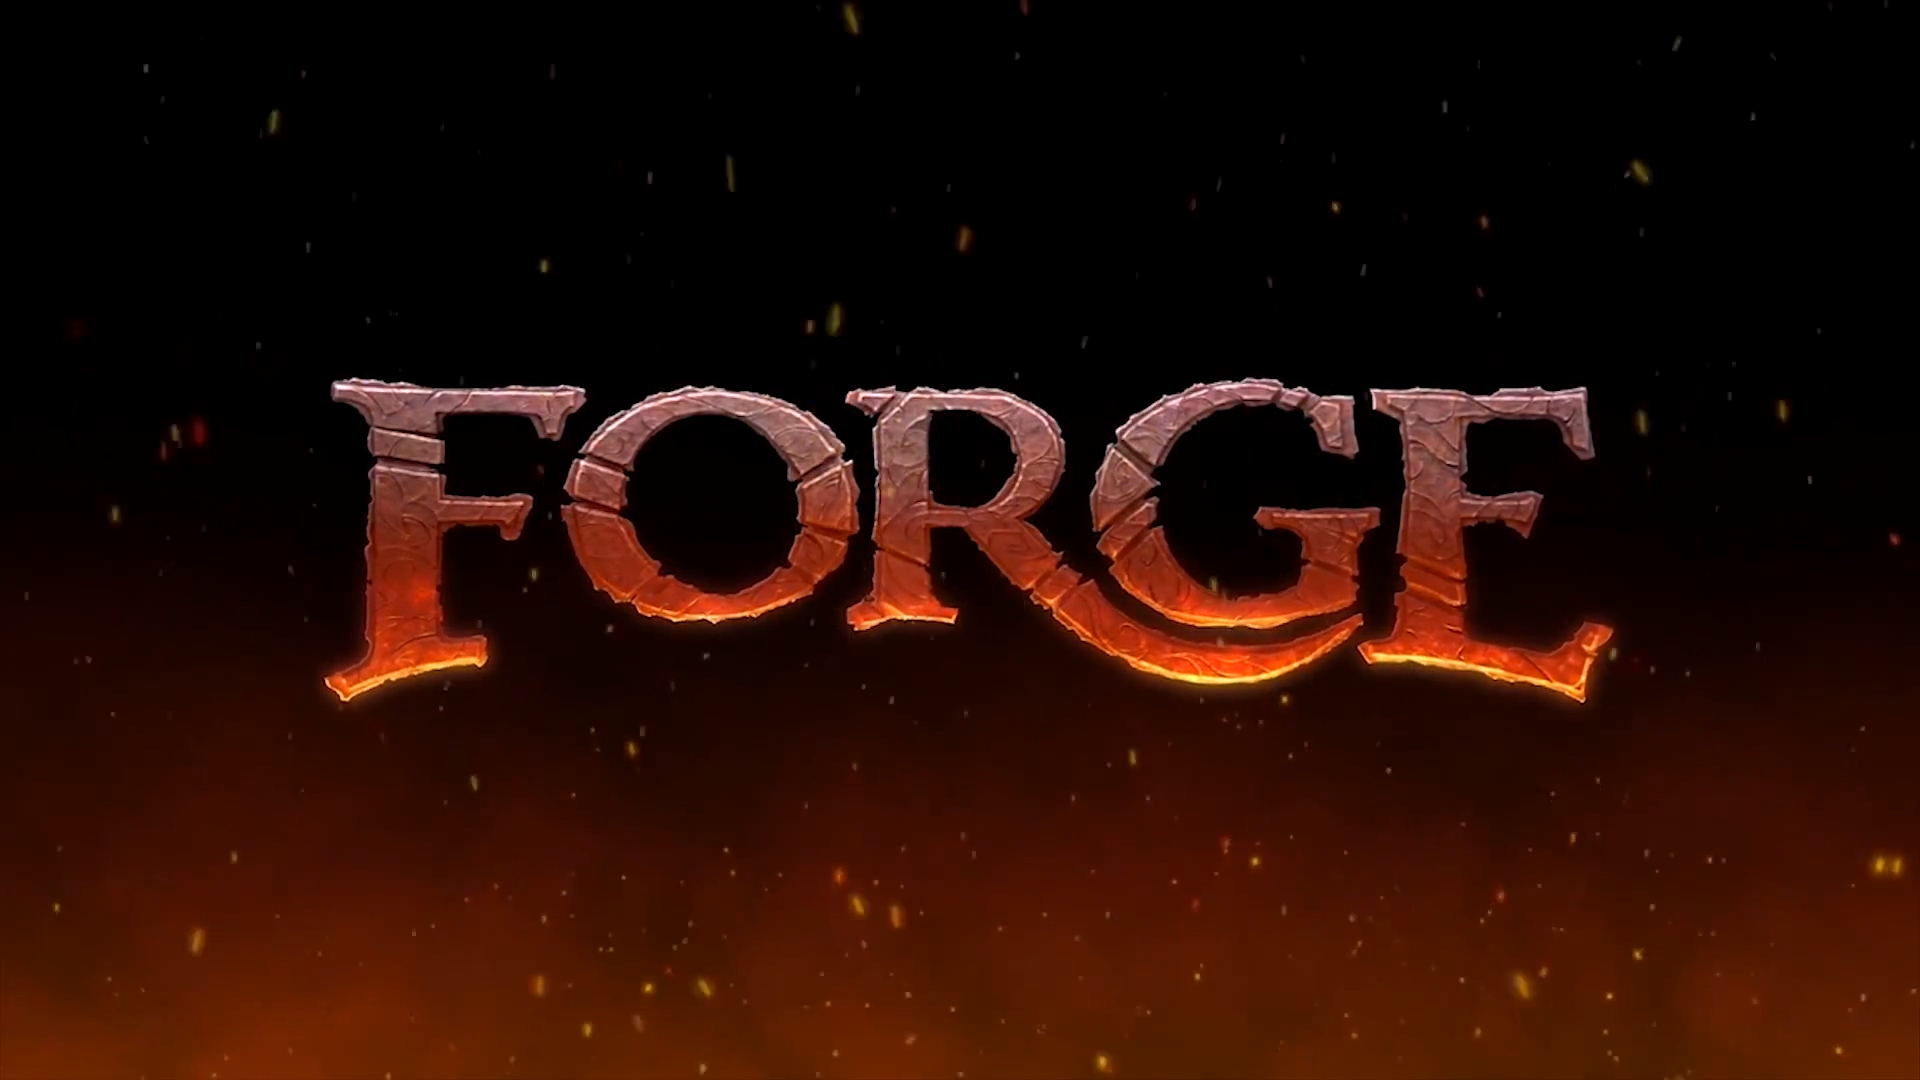 Forge on steam фото 43